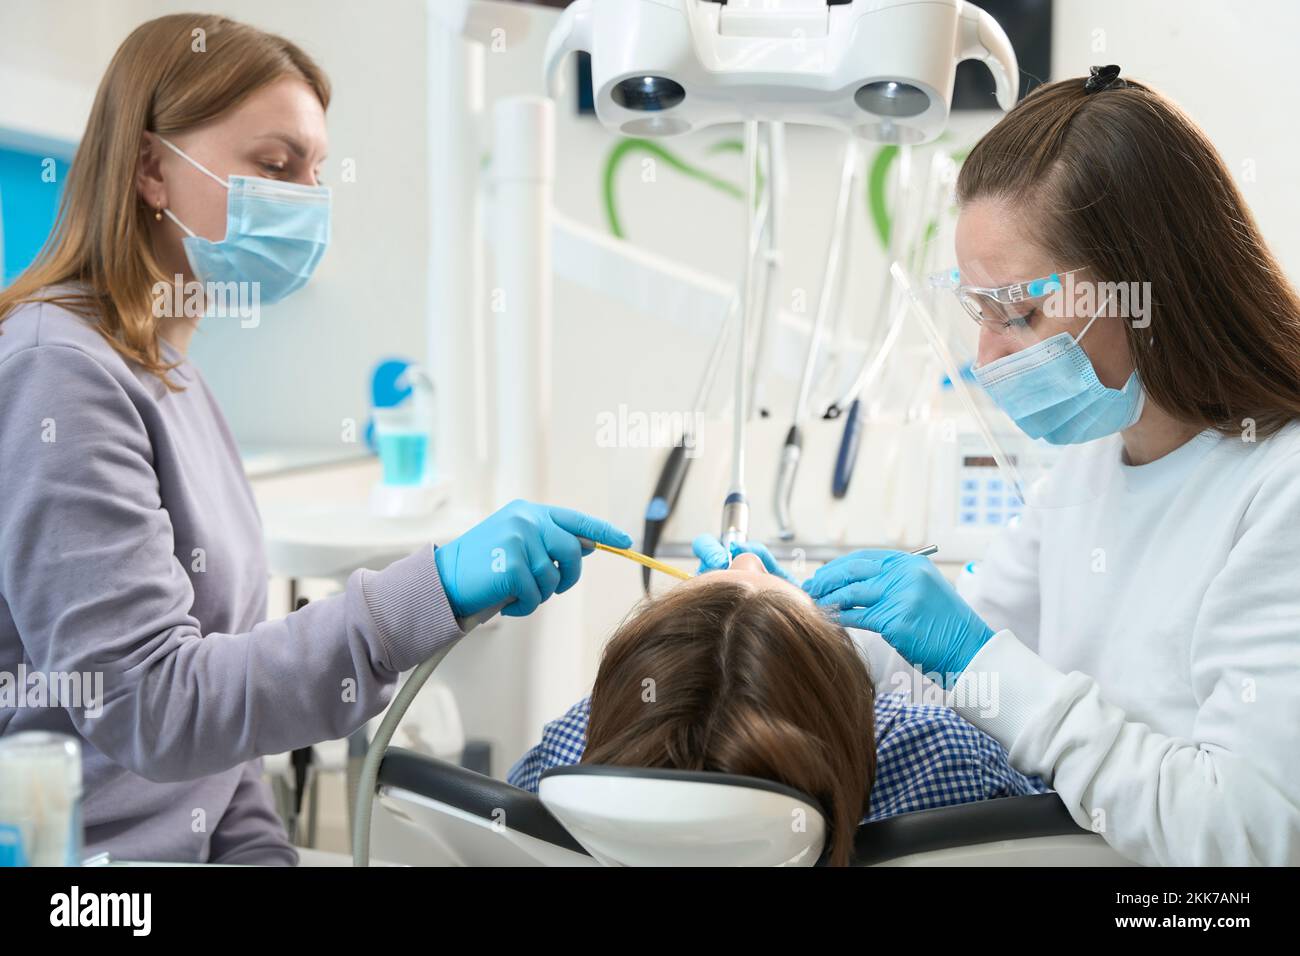 Woman doctor performs a dental procedure on a young patient Stock Photo